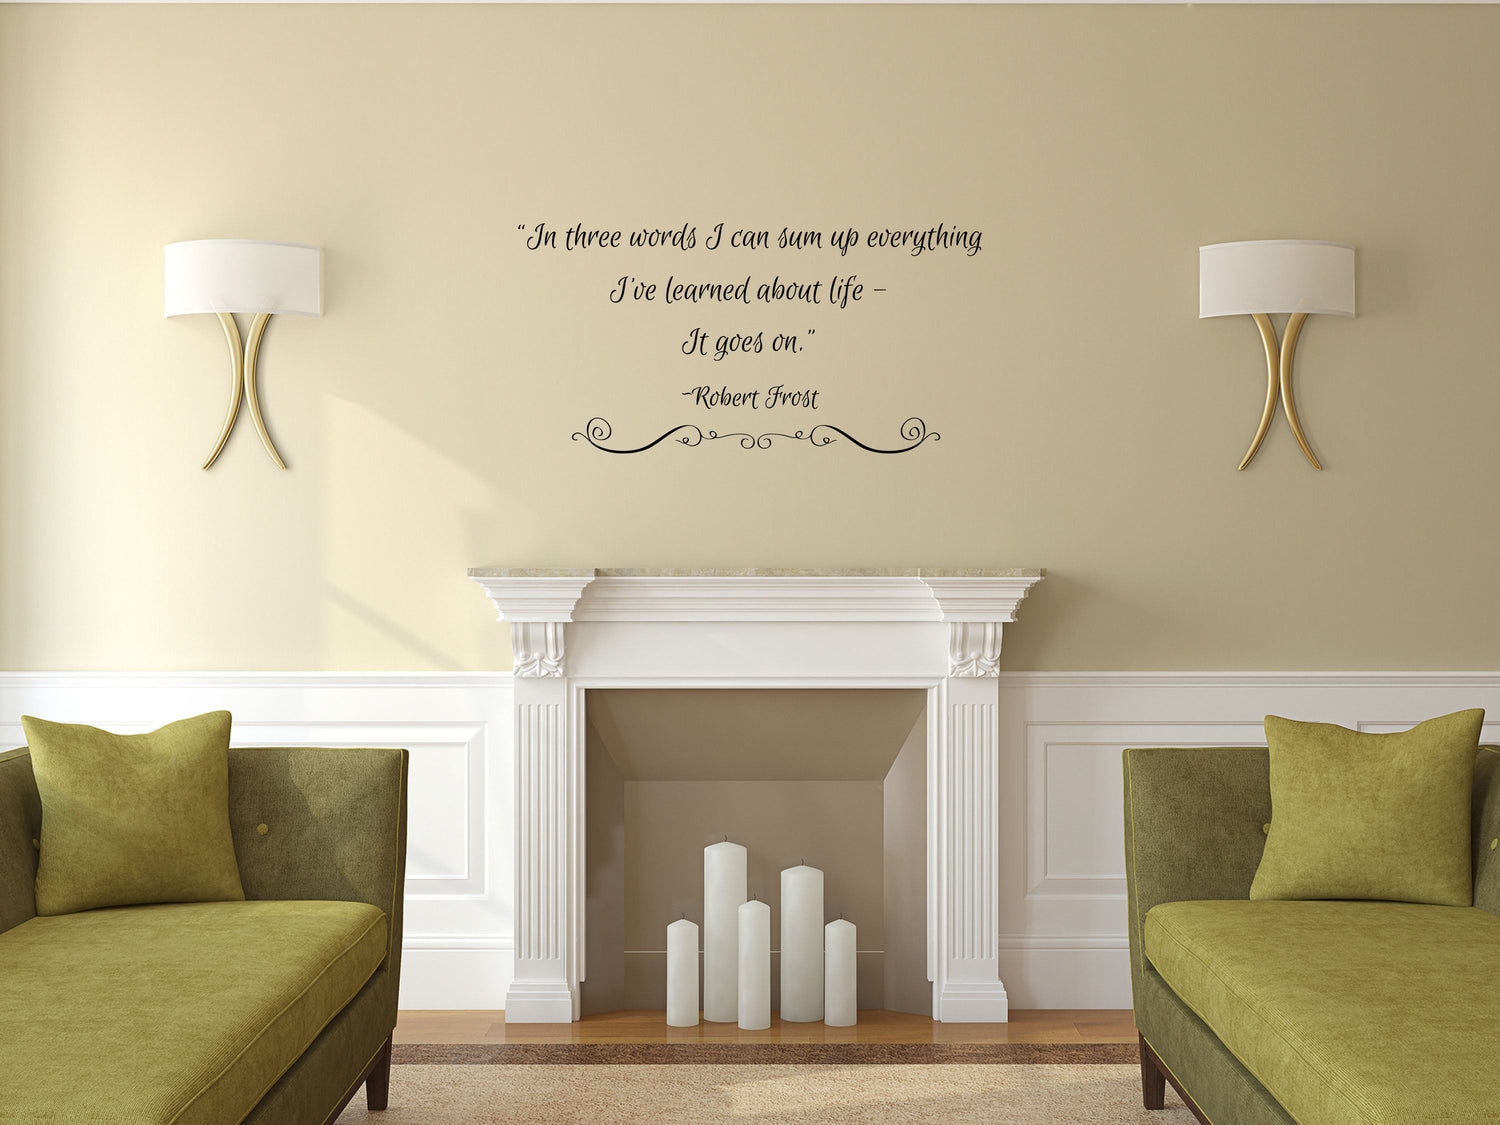 Robert Frost Decal Wall Vinyl Decal - Living Room Decal - Inspirational Wall Decal - Vinyl Wall Art - Wall Quote Decal Vinyl Wall Decal Inspirational Wall Signs 